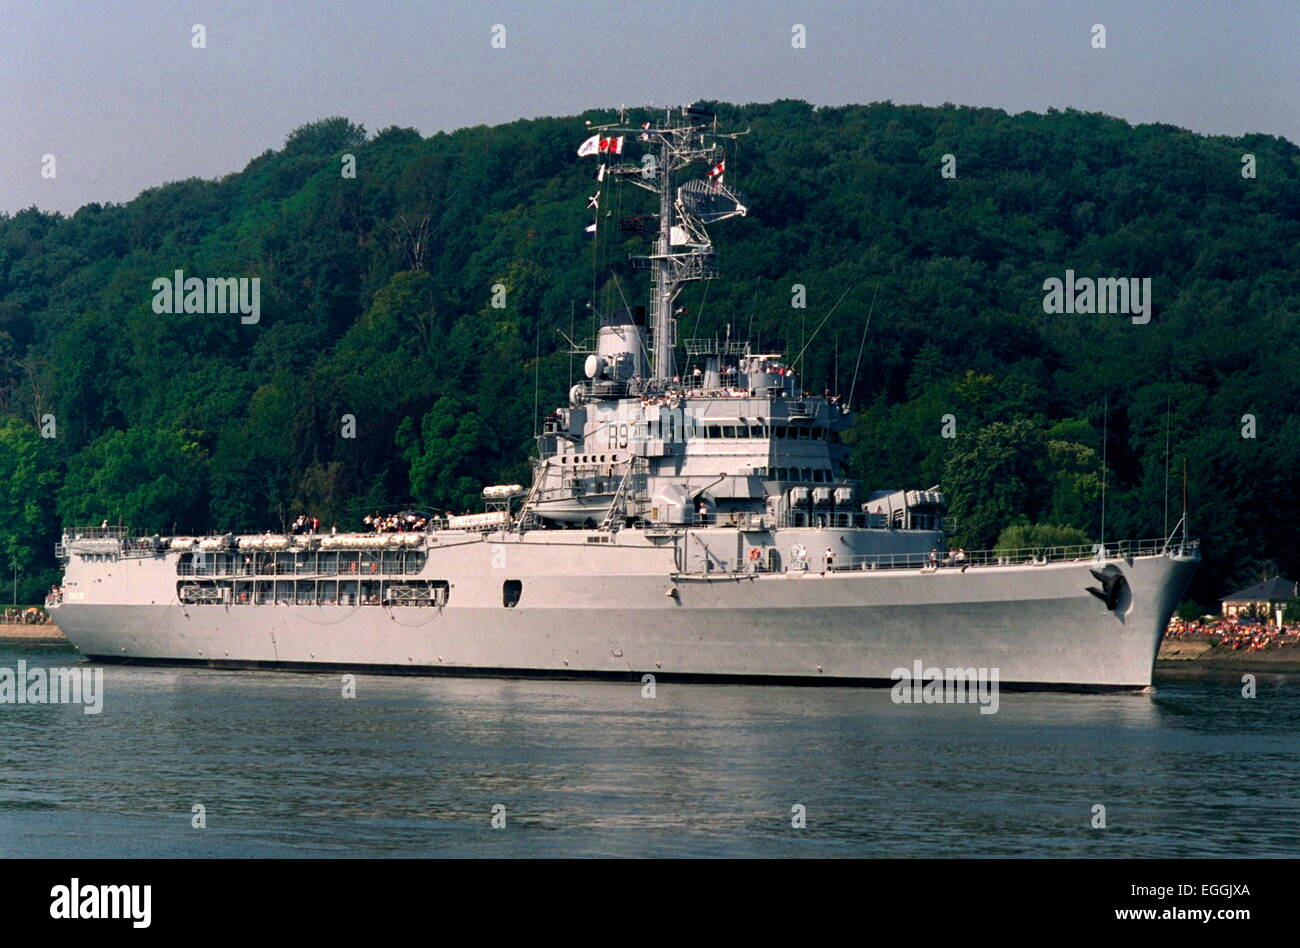 AJAXNETPHOTO. 18TH JULY, 1999. SAHUR, FRANCE. - ARMADA DU SIECLE - ARMADA OF THE CENTURY - HAPPIER DAYS. PRIDE OF THE FRENCH NAVY HELICOPTER CRUISER JEANNE D'ARC UNDER WAY ON THE RIVER SEINE TOWARD LE HAVRE DURING THE FESTIVAL 'SAIL PAST'. PHOTO:JONATHAN EASTLAND/AJAX REF:CD0055_23 Stock Photo